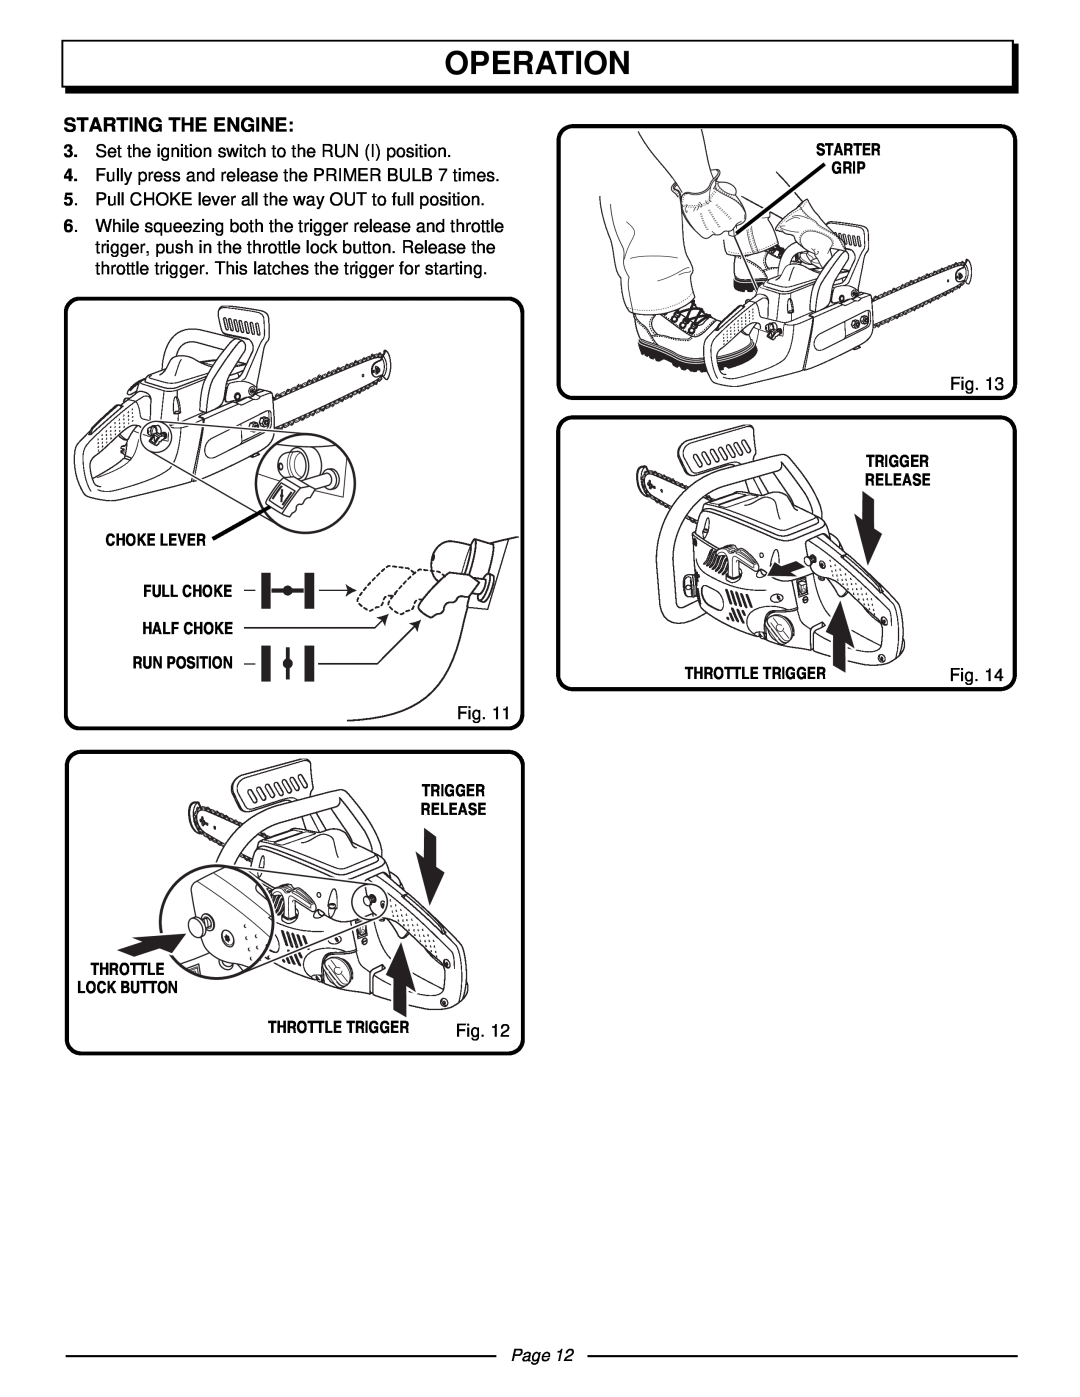 Homelite UT10510 manual Operation, Starting The Engine, Page 